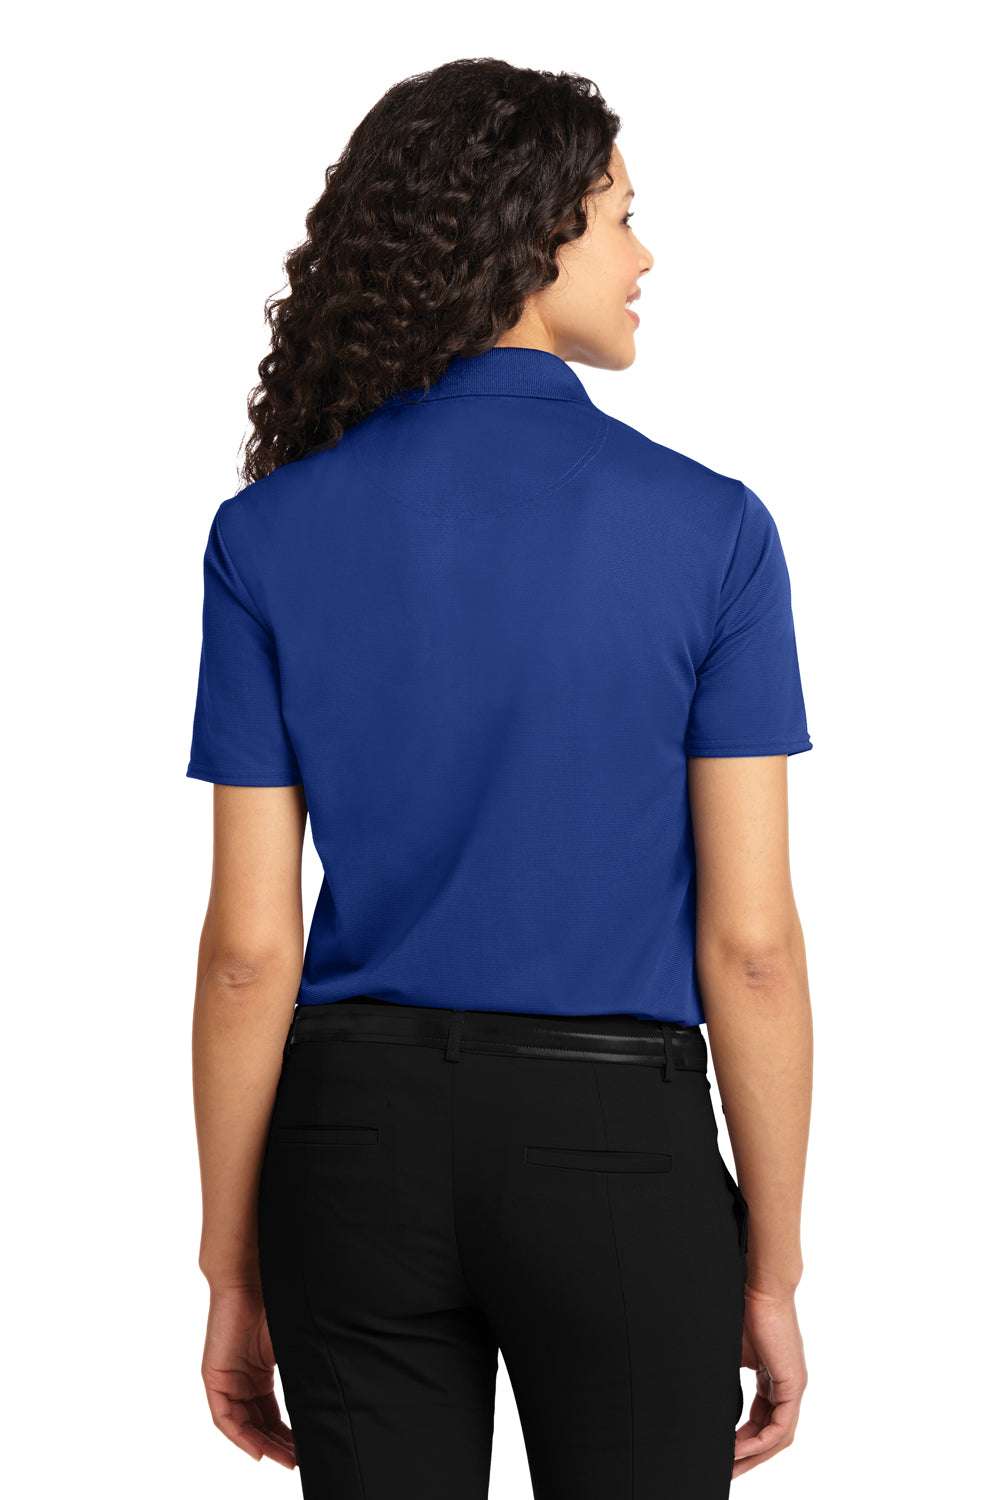 Port Authority L525 Womens Dry Zone Moisture Wicking Short Sleeve Polo Shirt Royal Blue Back